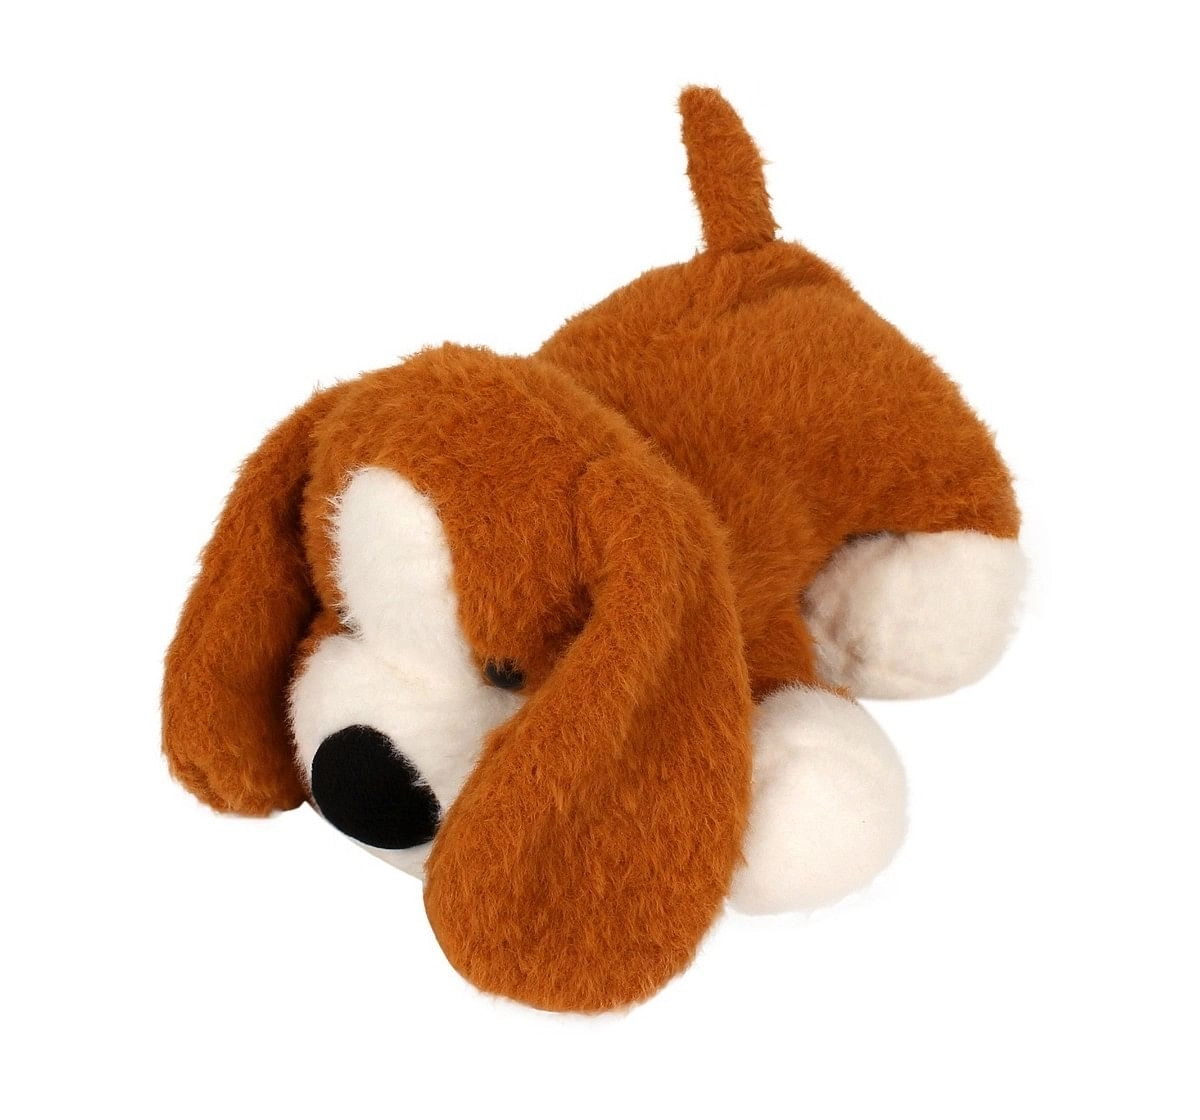 Fuzzbuzz Soft Lying Dog - Lt. Brown - 33Cm Quirky Soft Toys for Kids age 0M+ - 15 Cm (Light Brown)